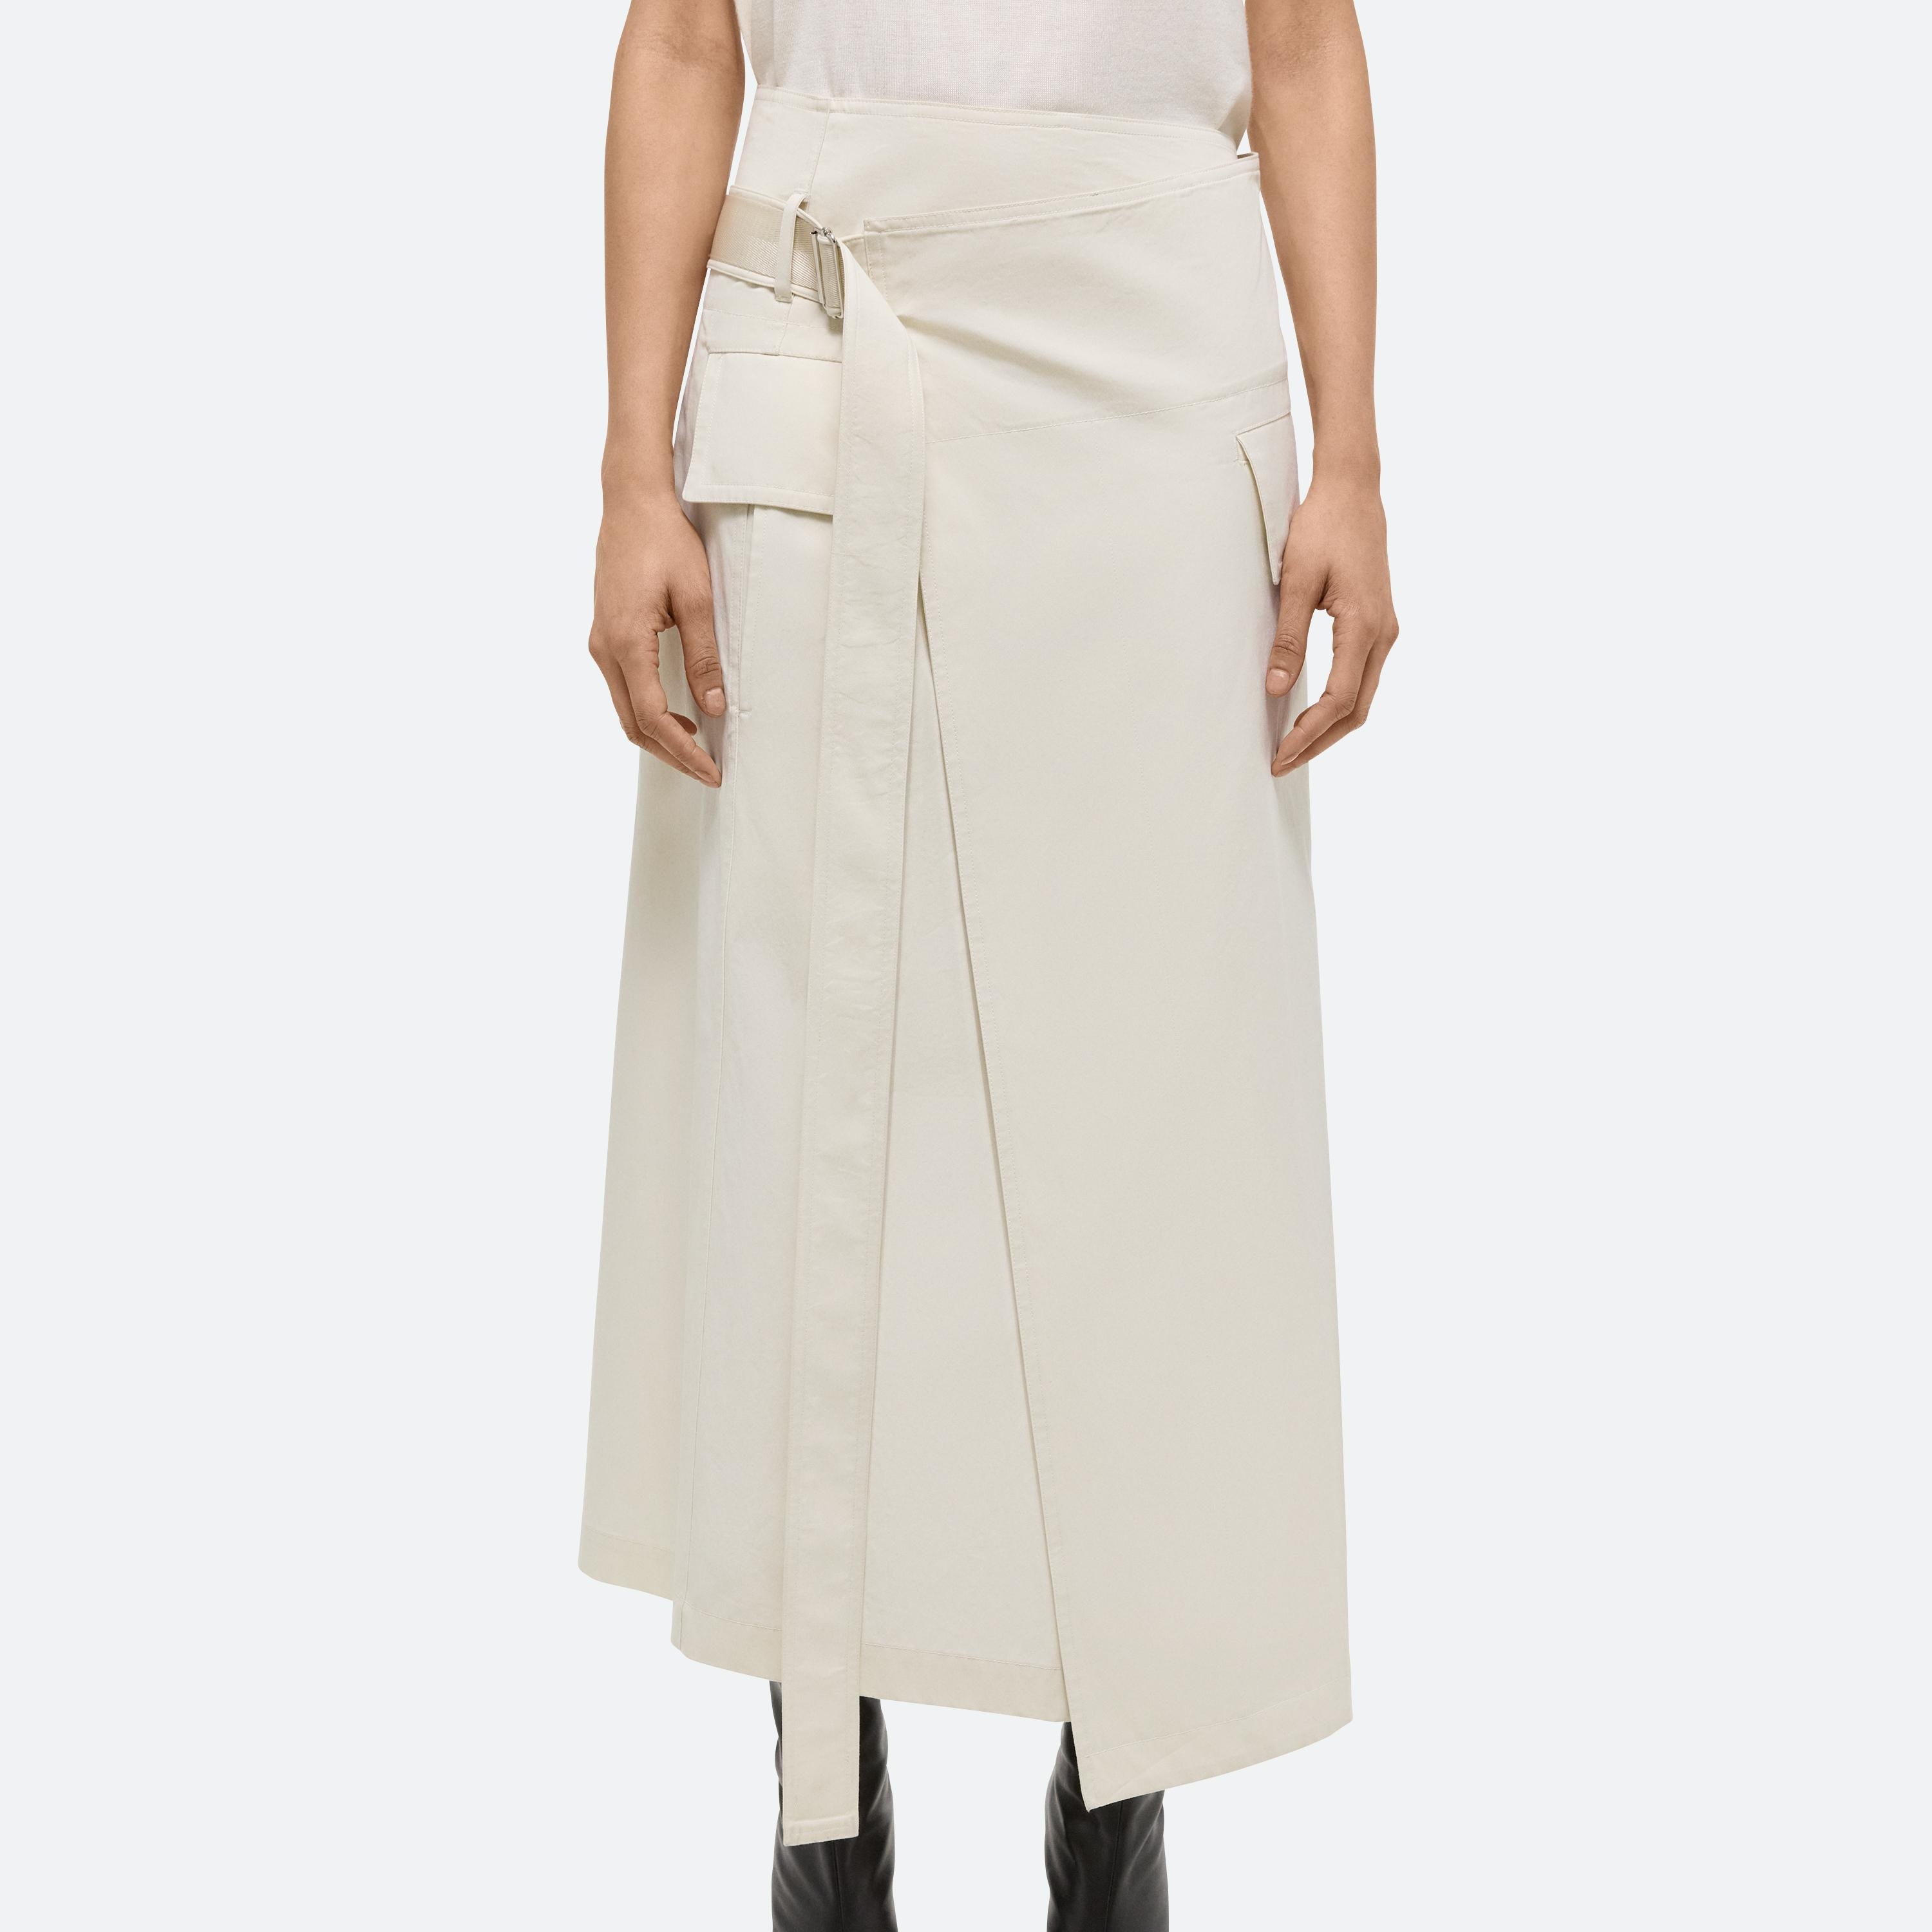 TRENCH WRAP SKIRT - 6